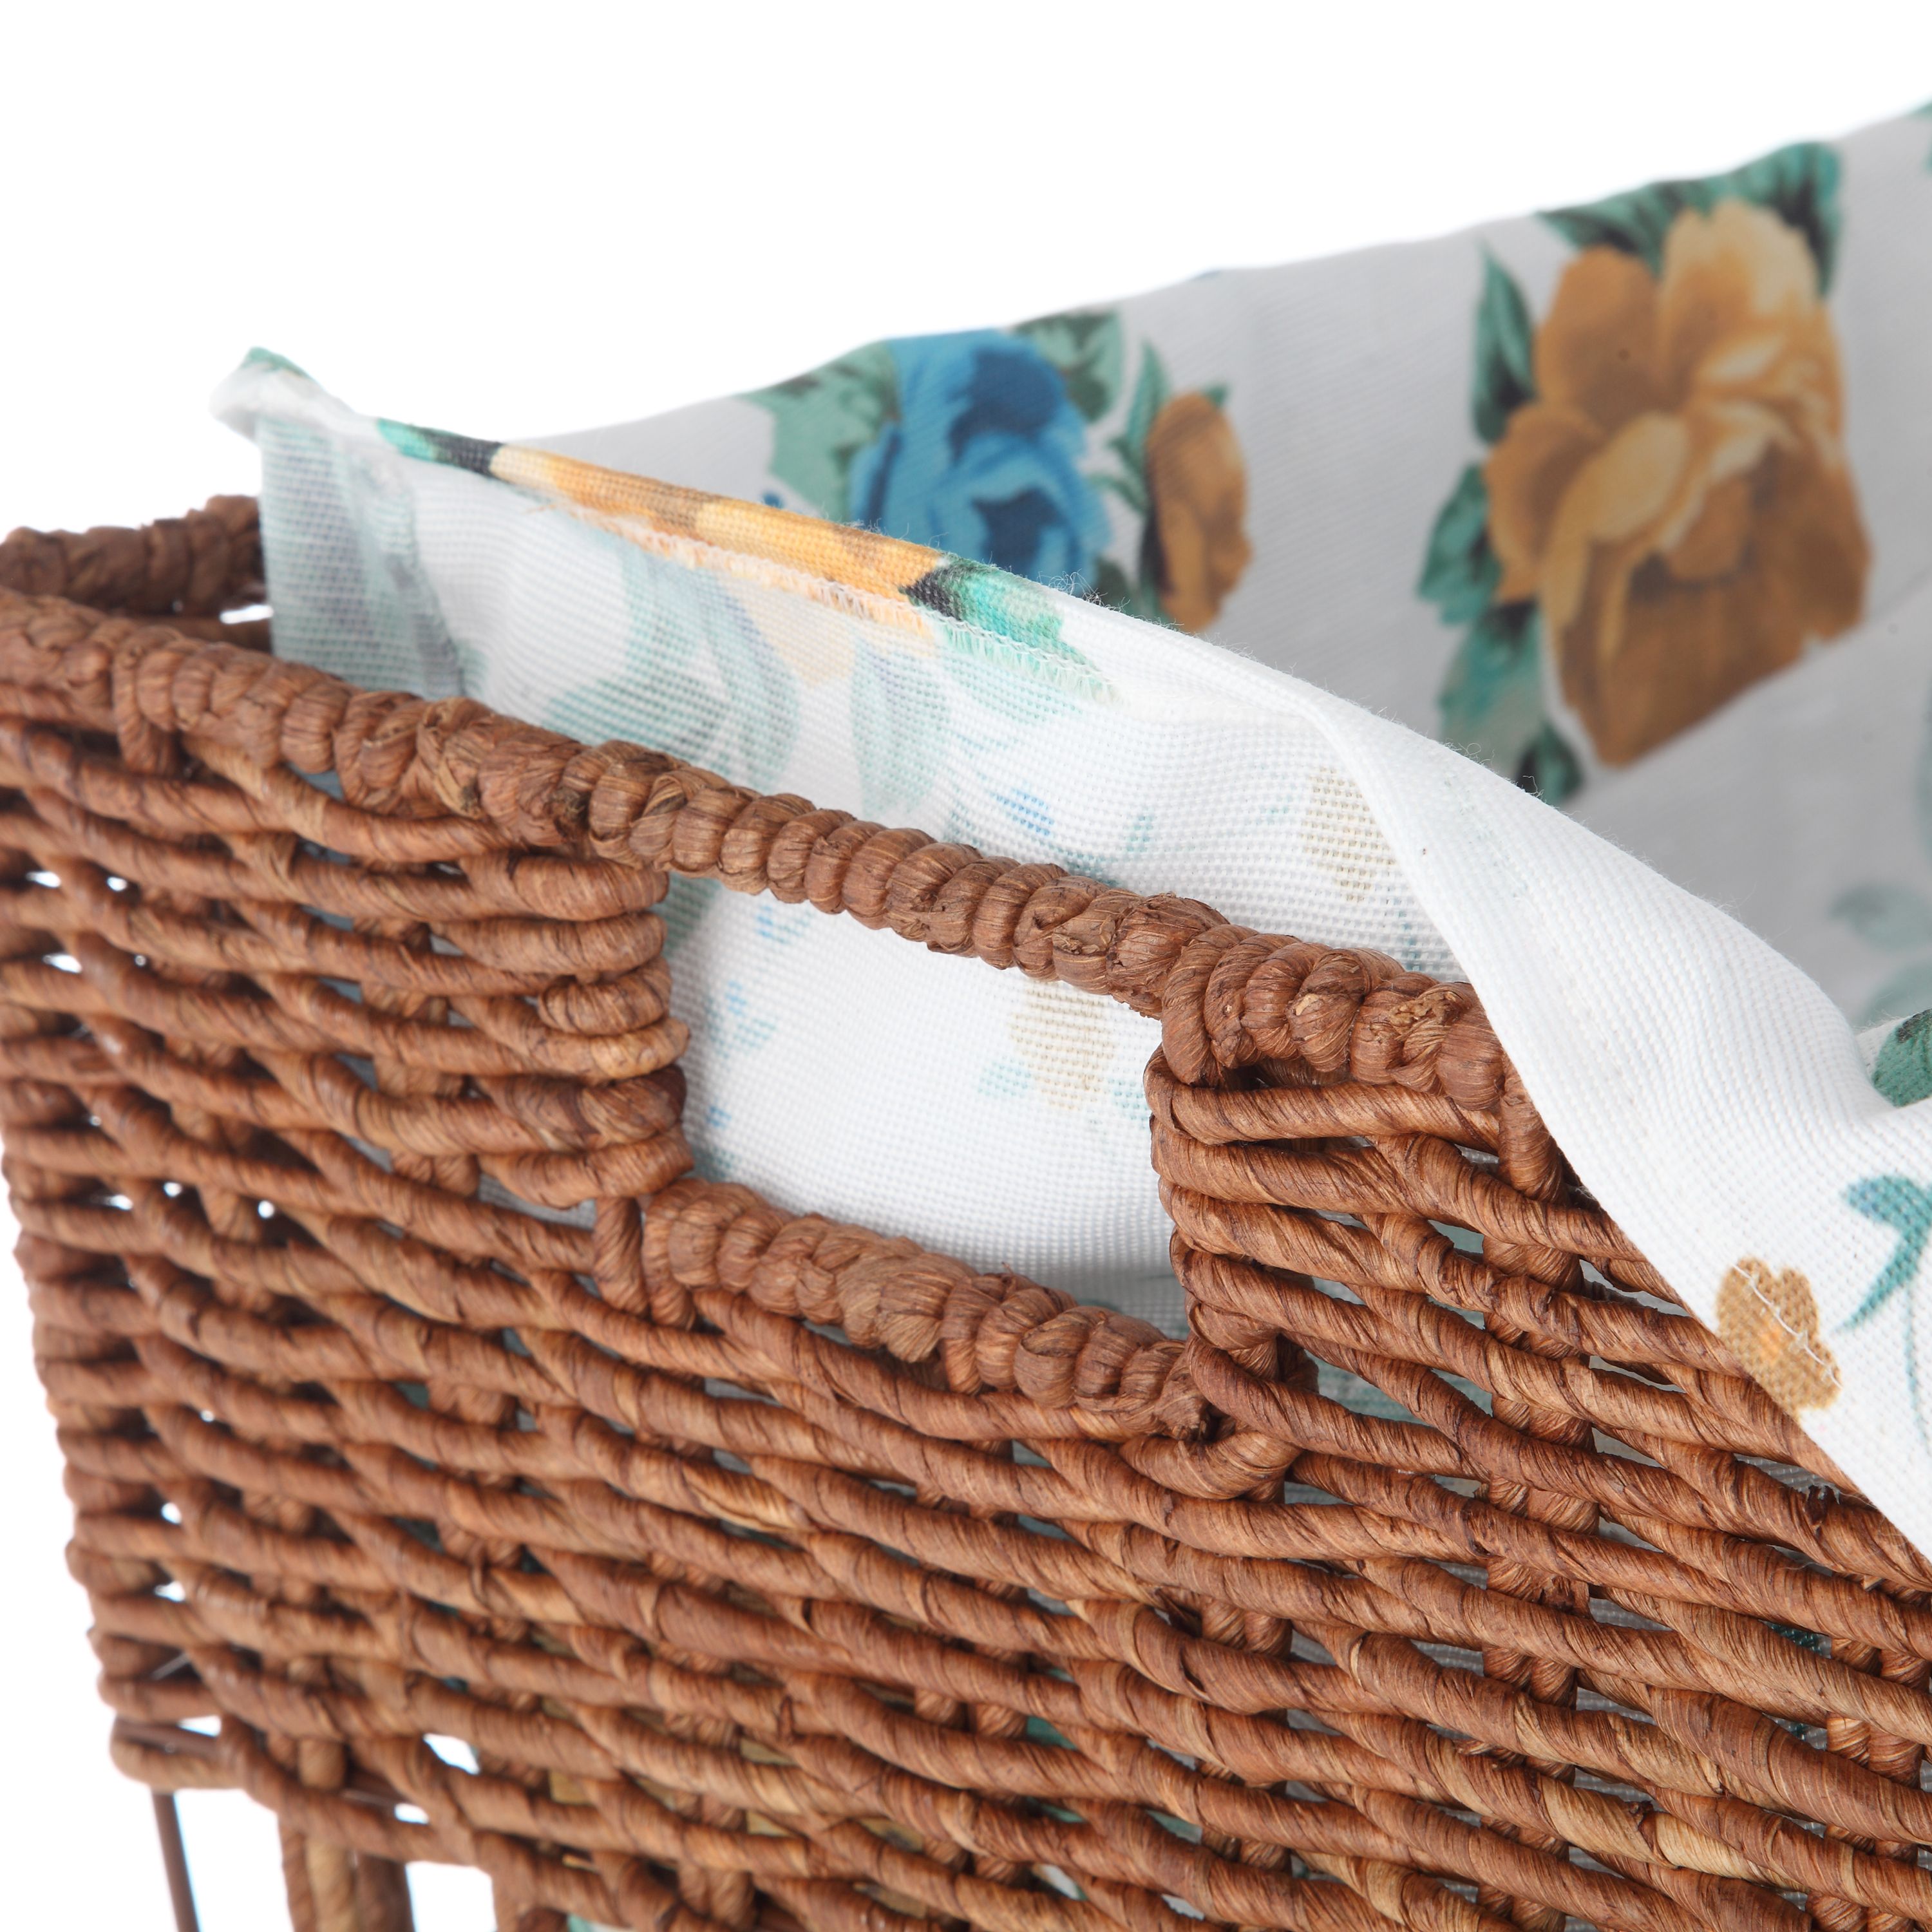 The Pioneer Woman Rose Shadow Maize Laundry Hamper - image 4 of 6